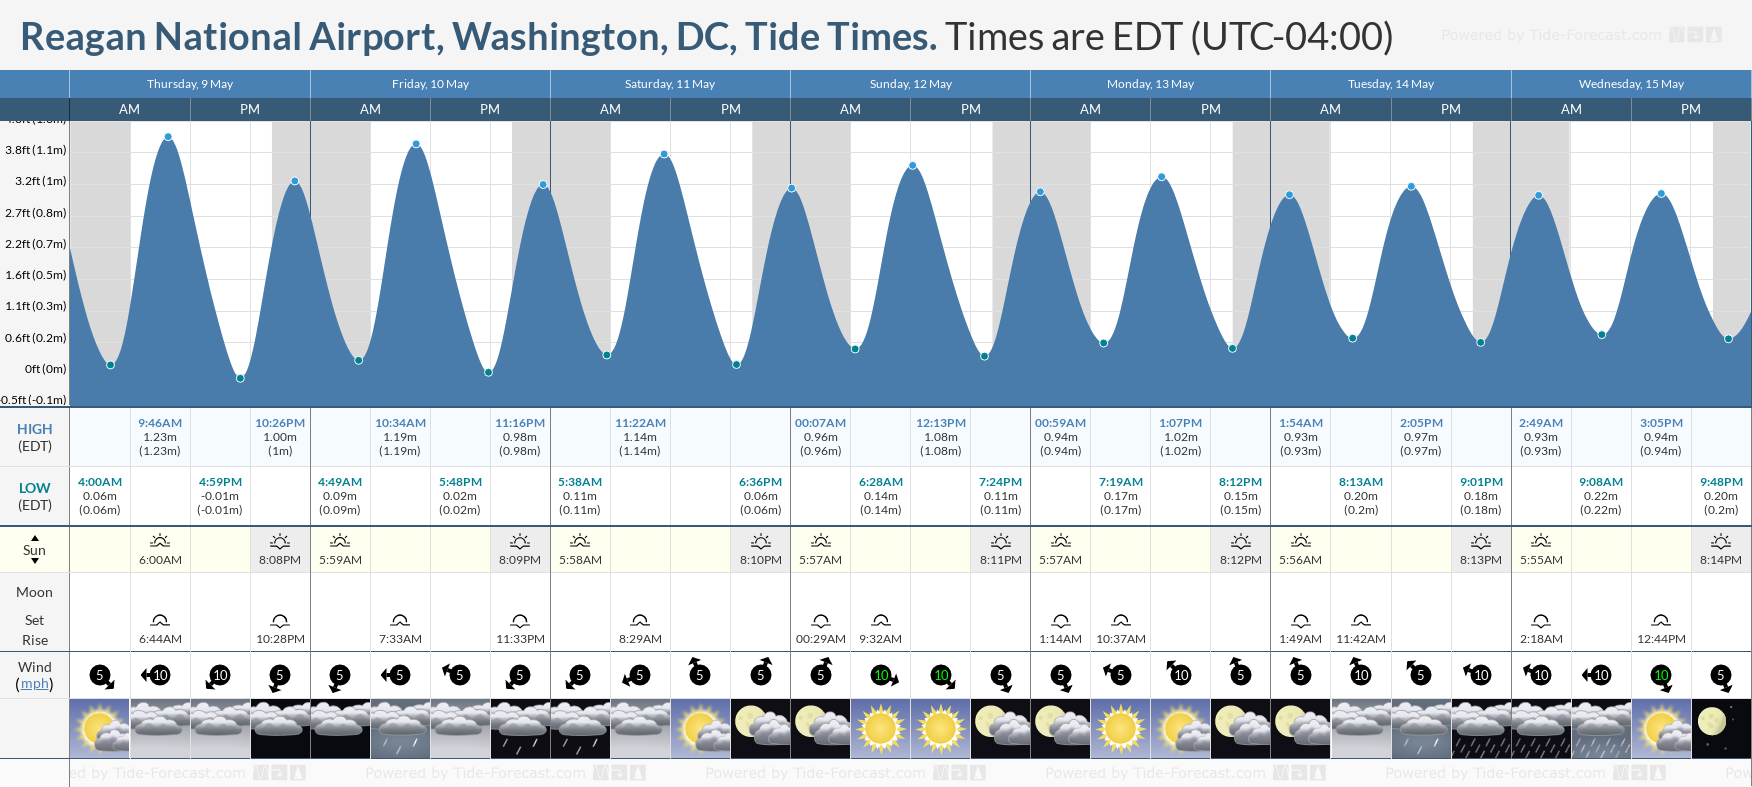 Reagan National Airport, Washington, DC Tide Chart including high and low tide tide times for the next 7 days